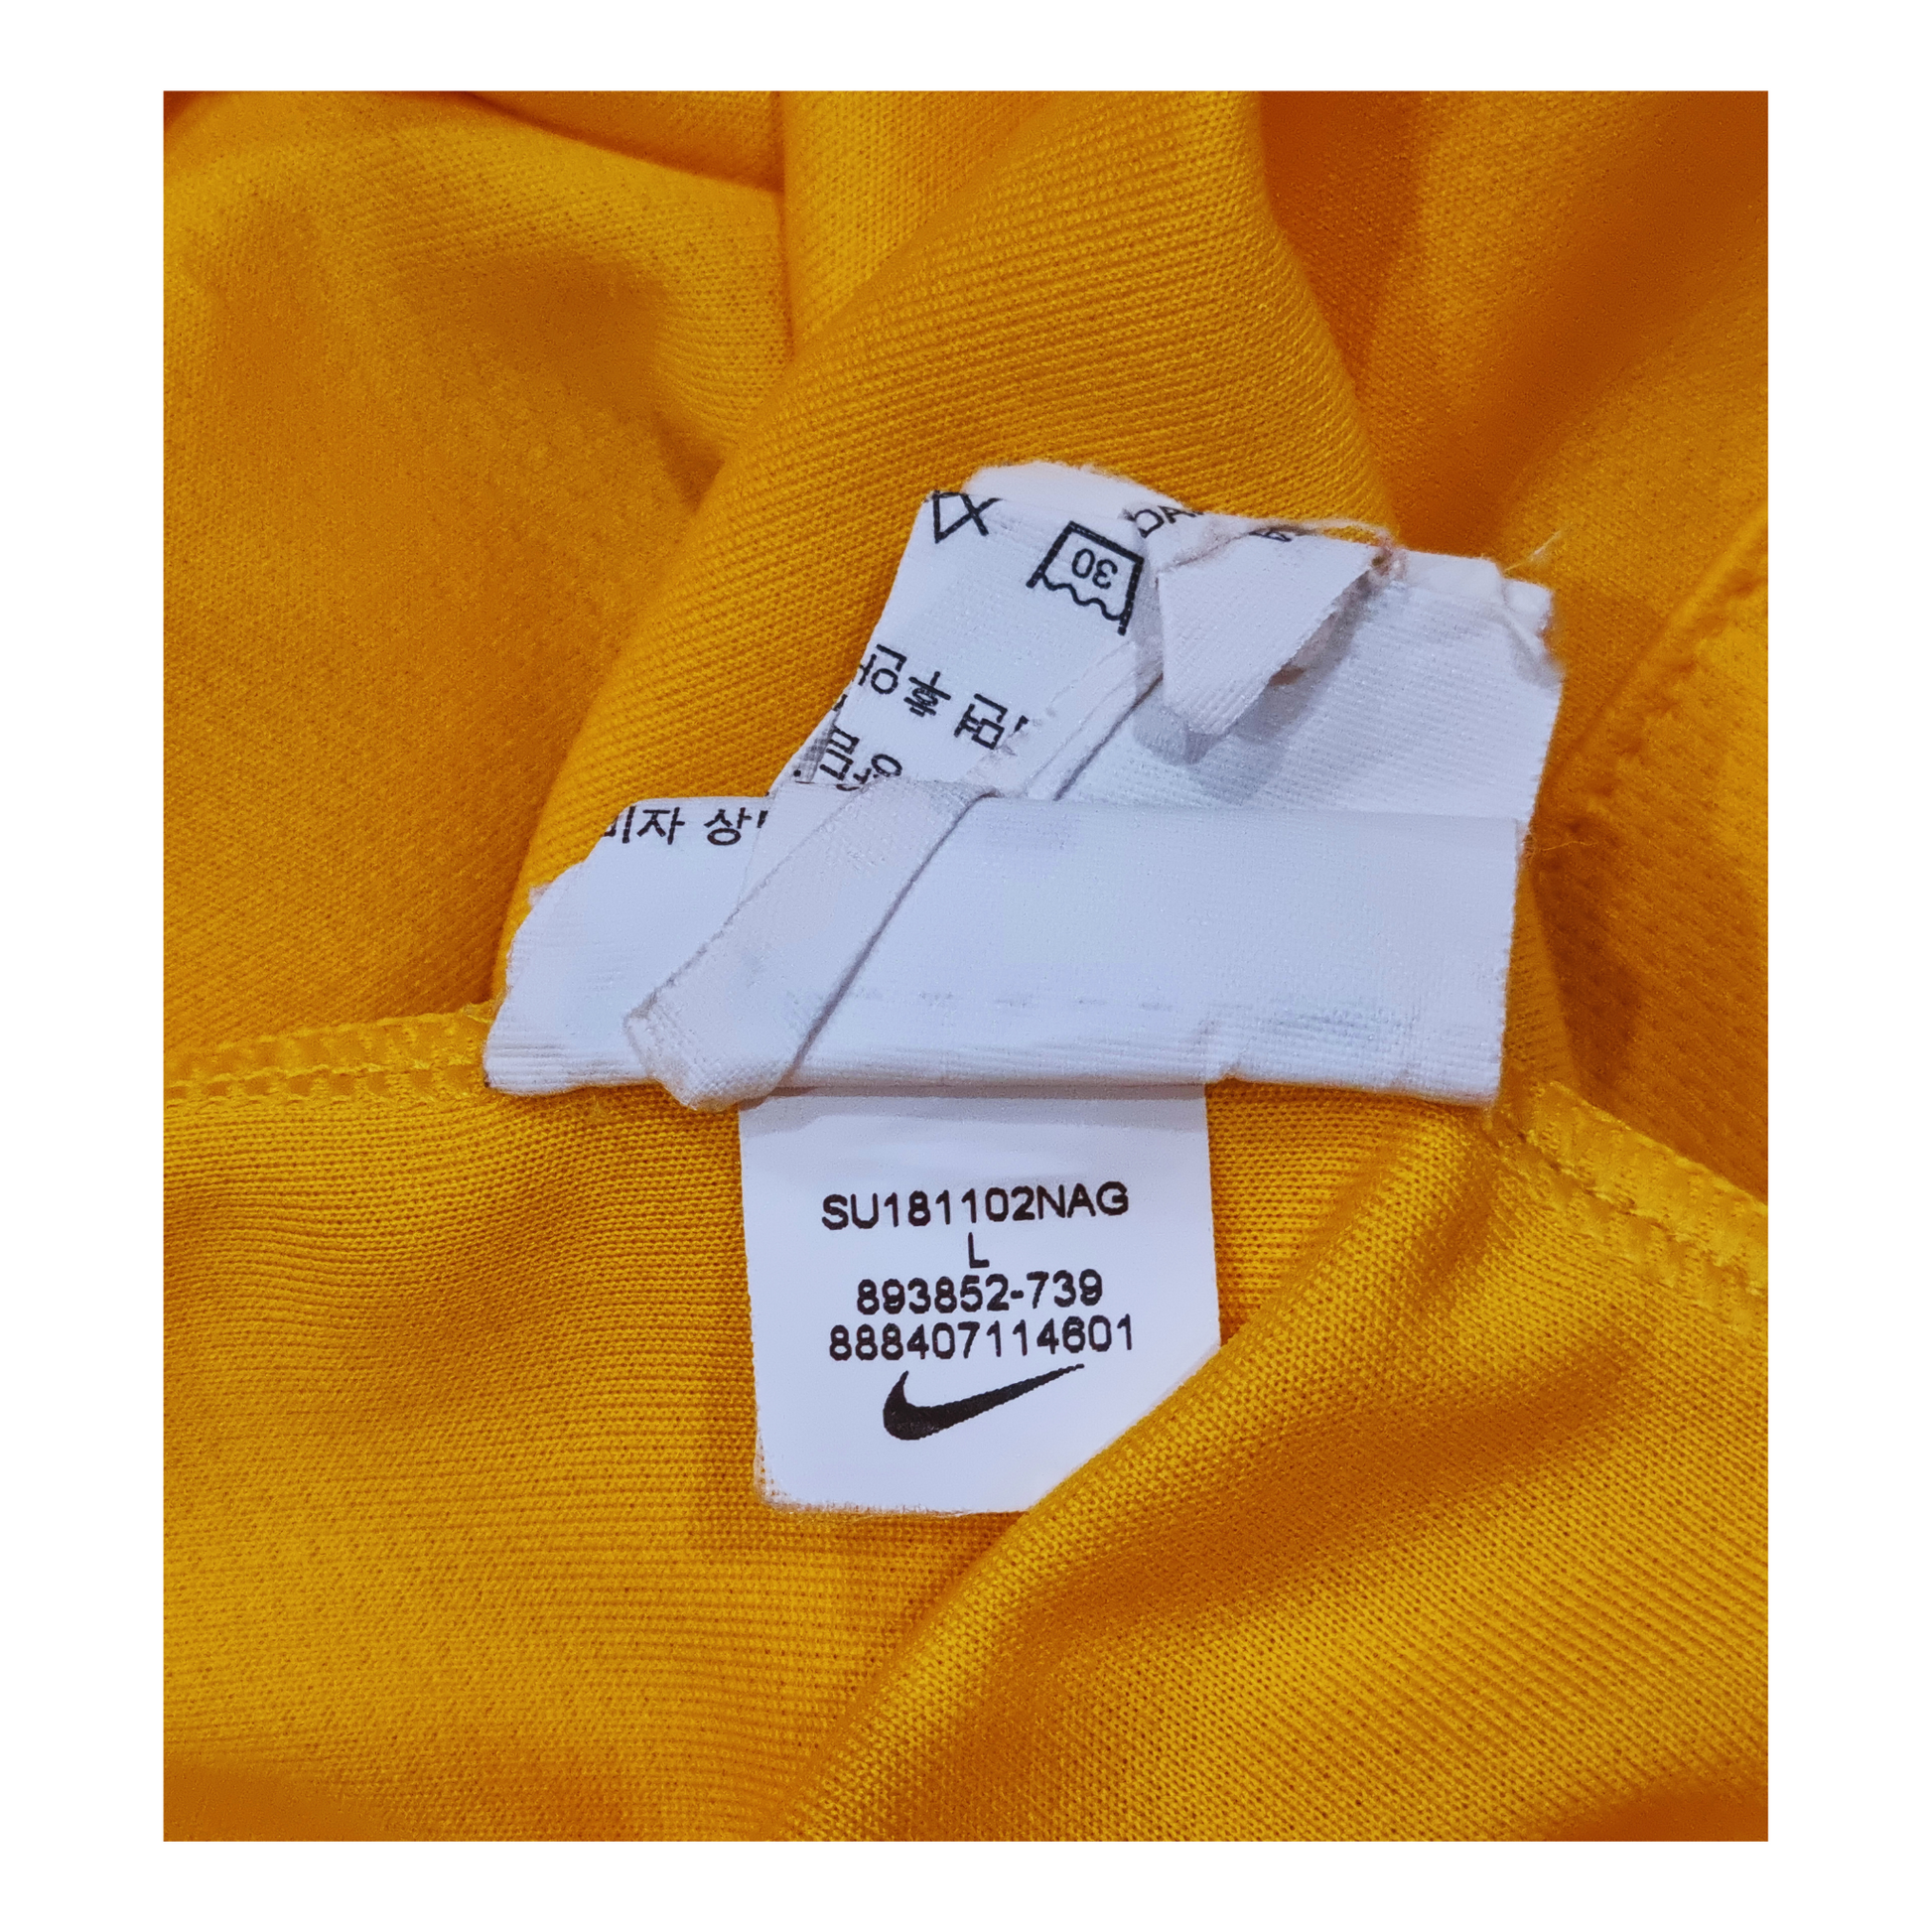 A yellow Australia Nike Australia 2018 Home Jersey with a label on it.